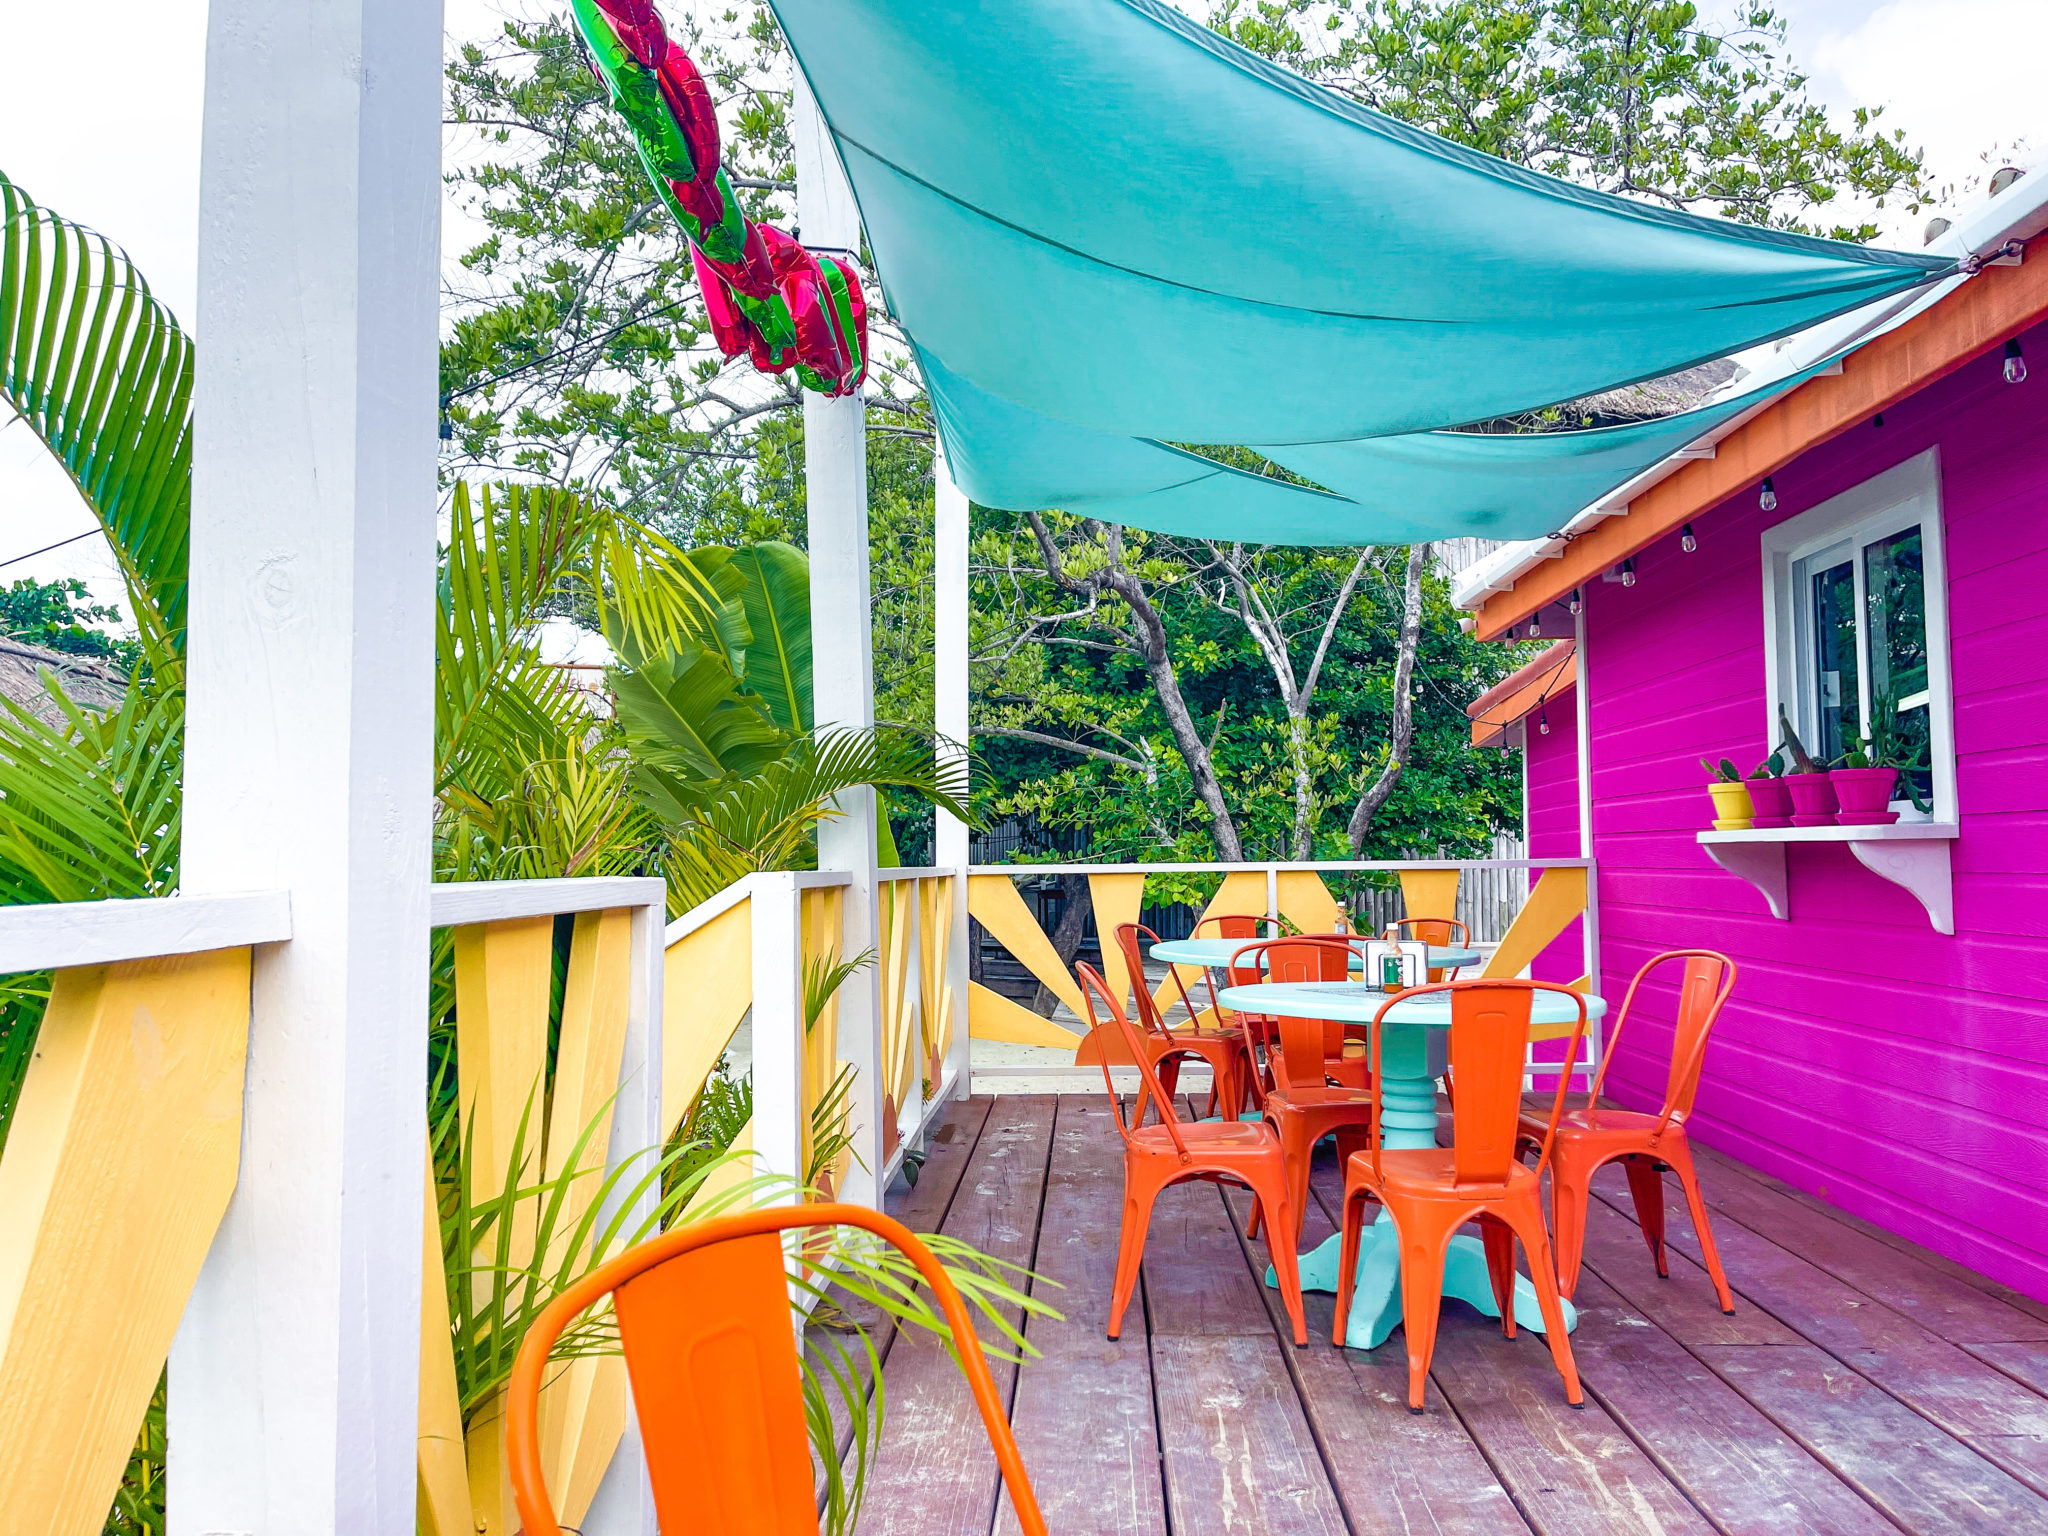 Ten Delicious Foods and Drinks in Ambergris Caye, Belize - Jolly Tomato